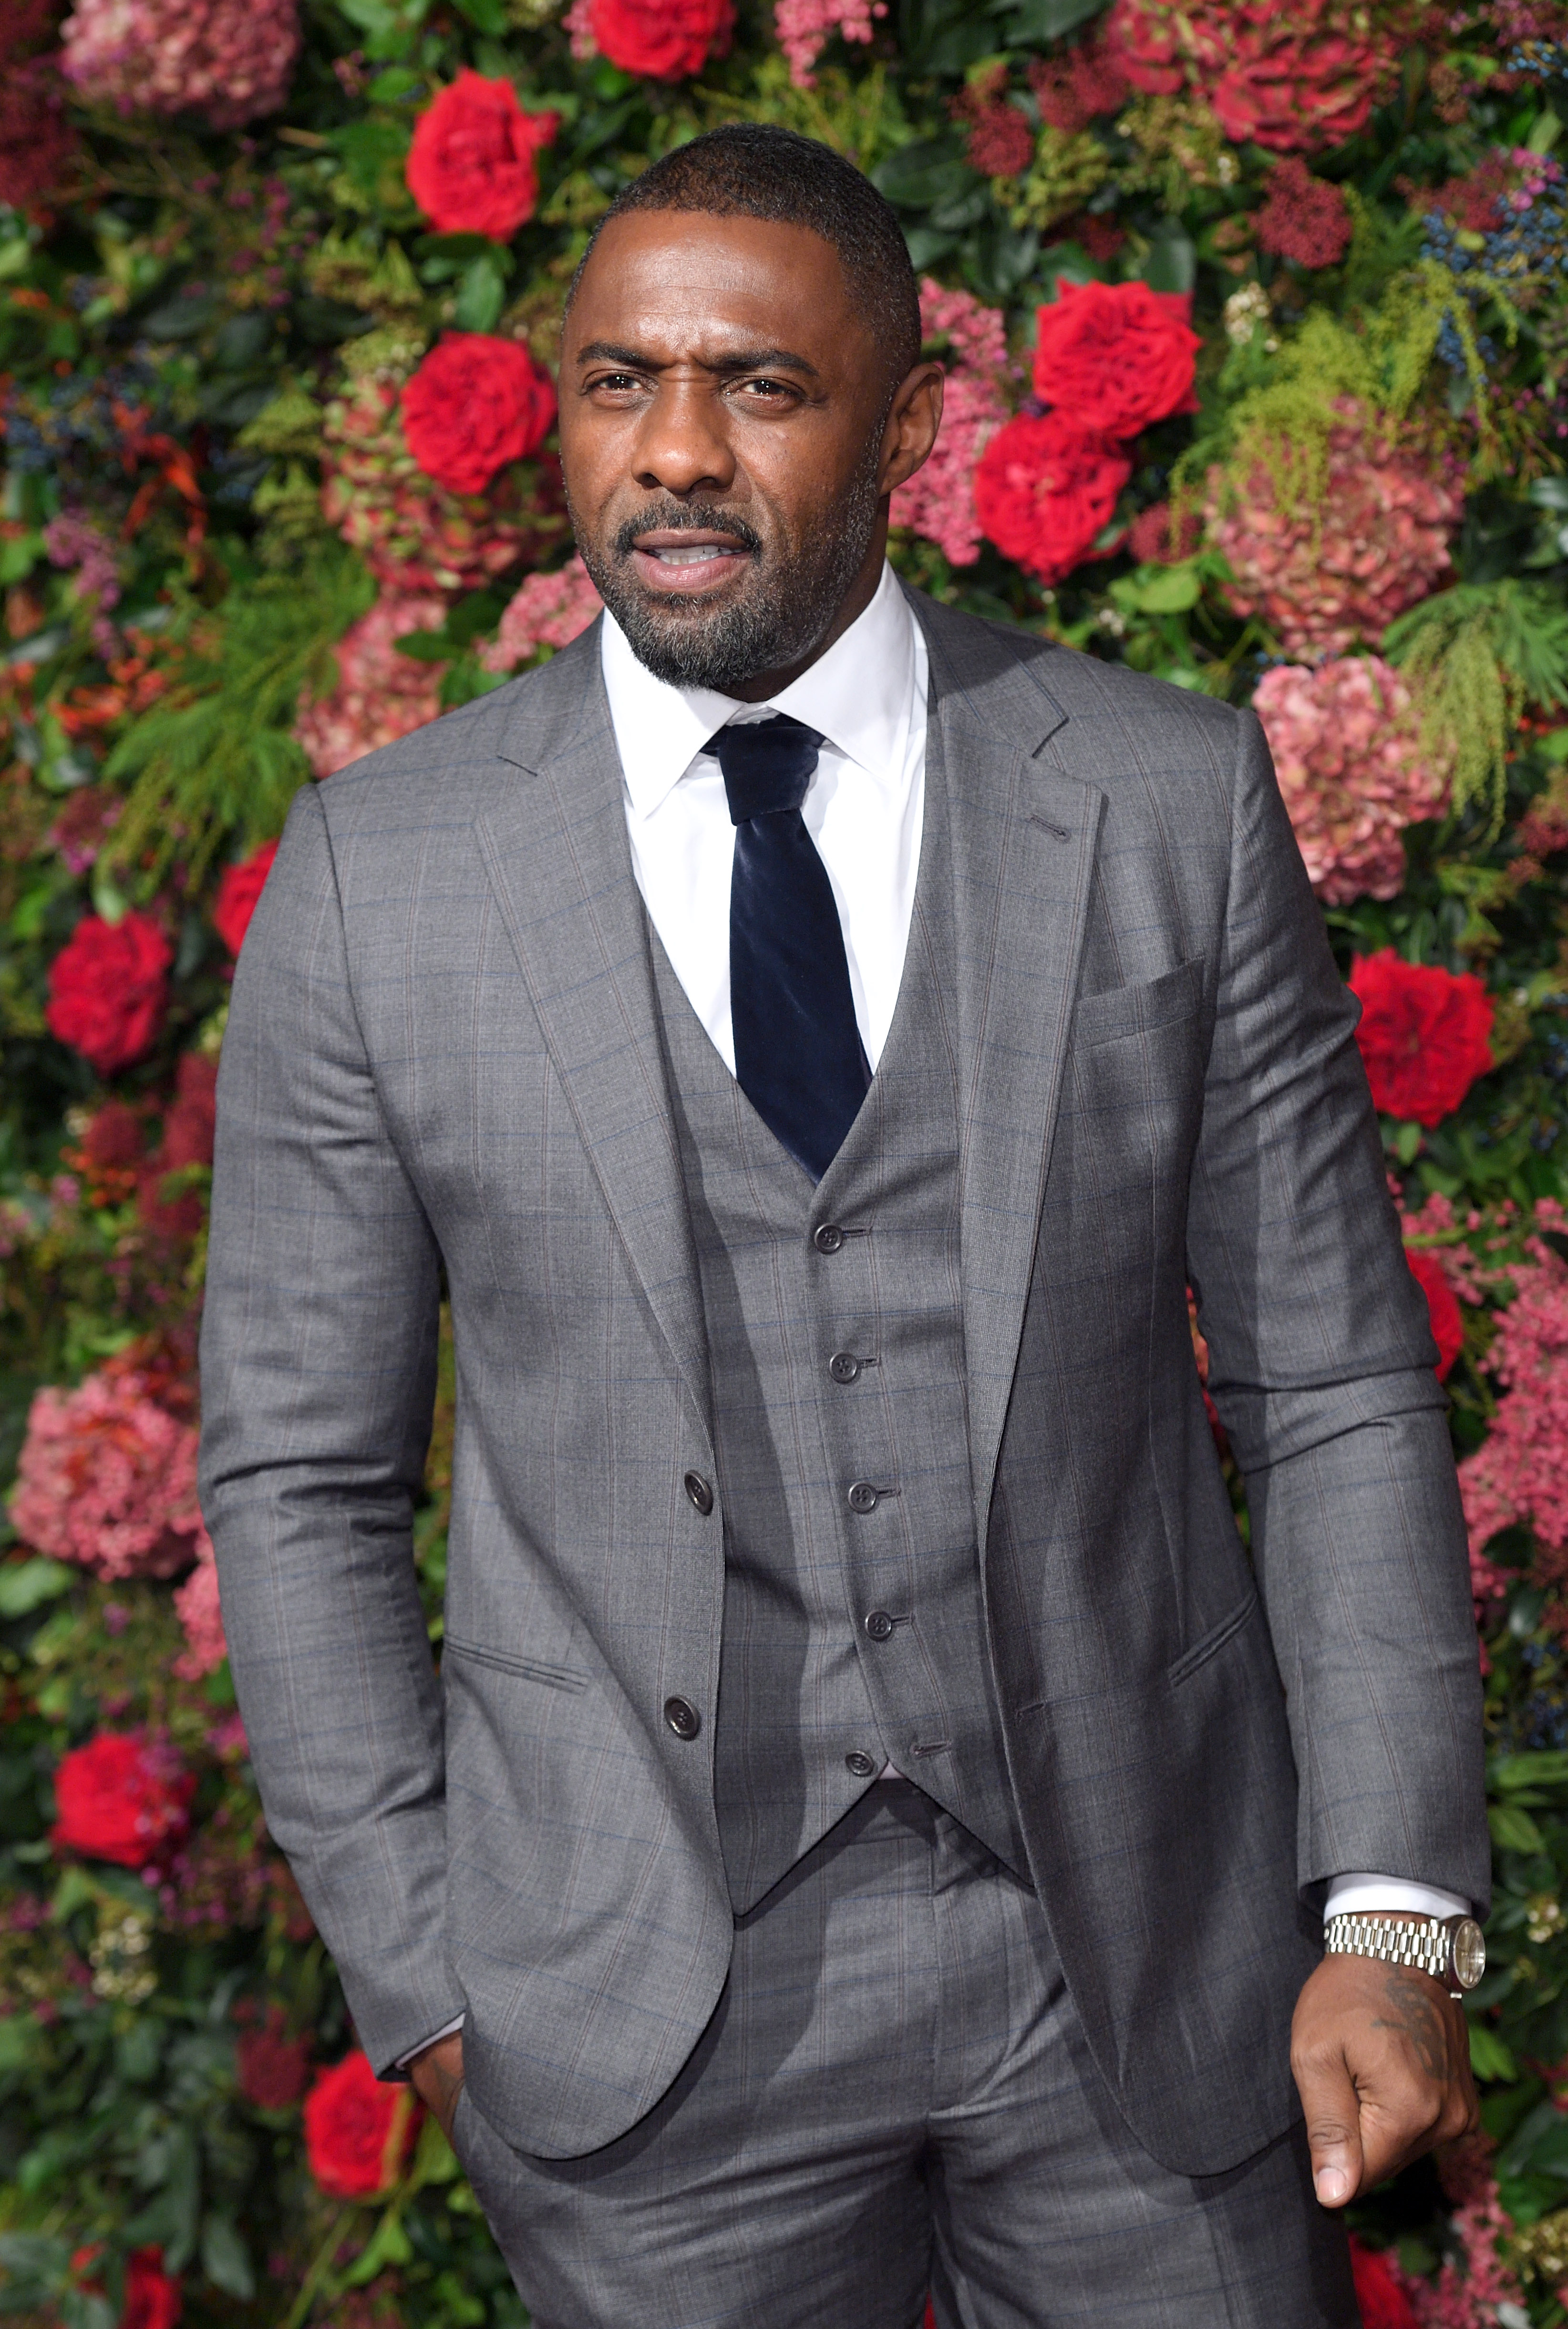 Fans want Idris Elba to replace him